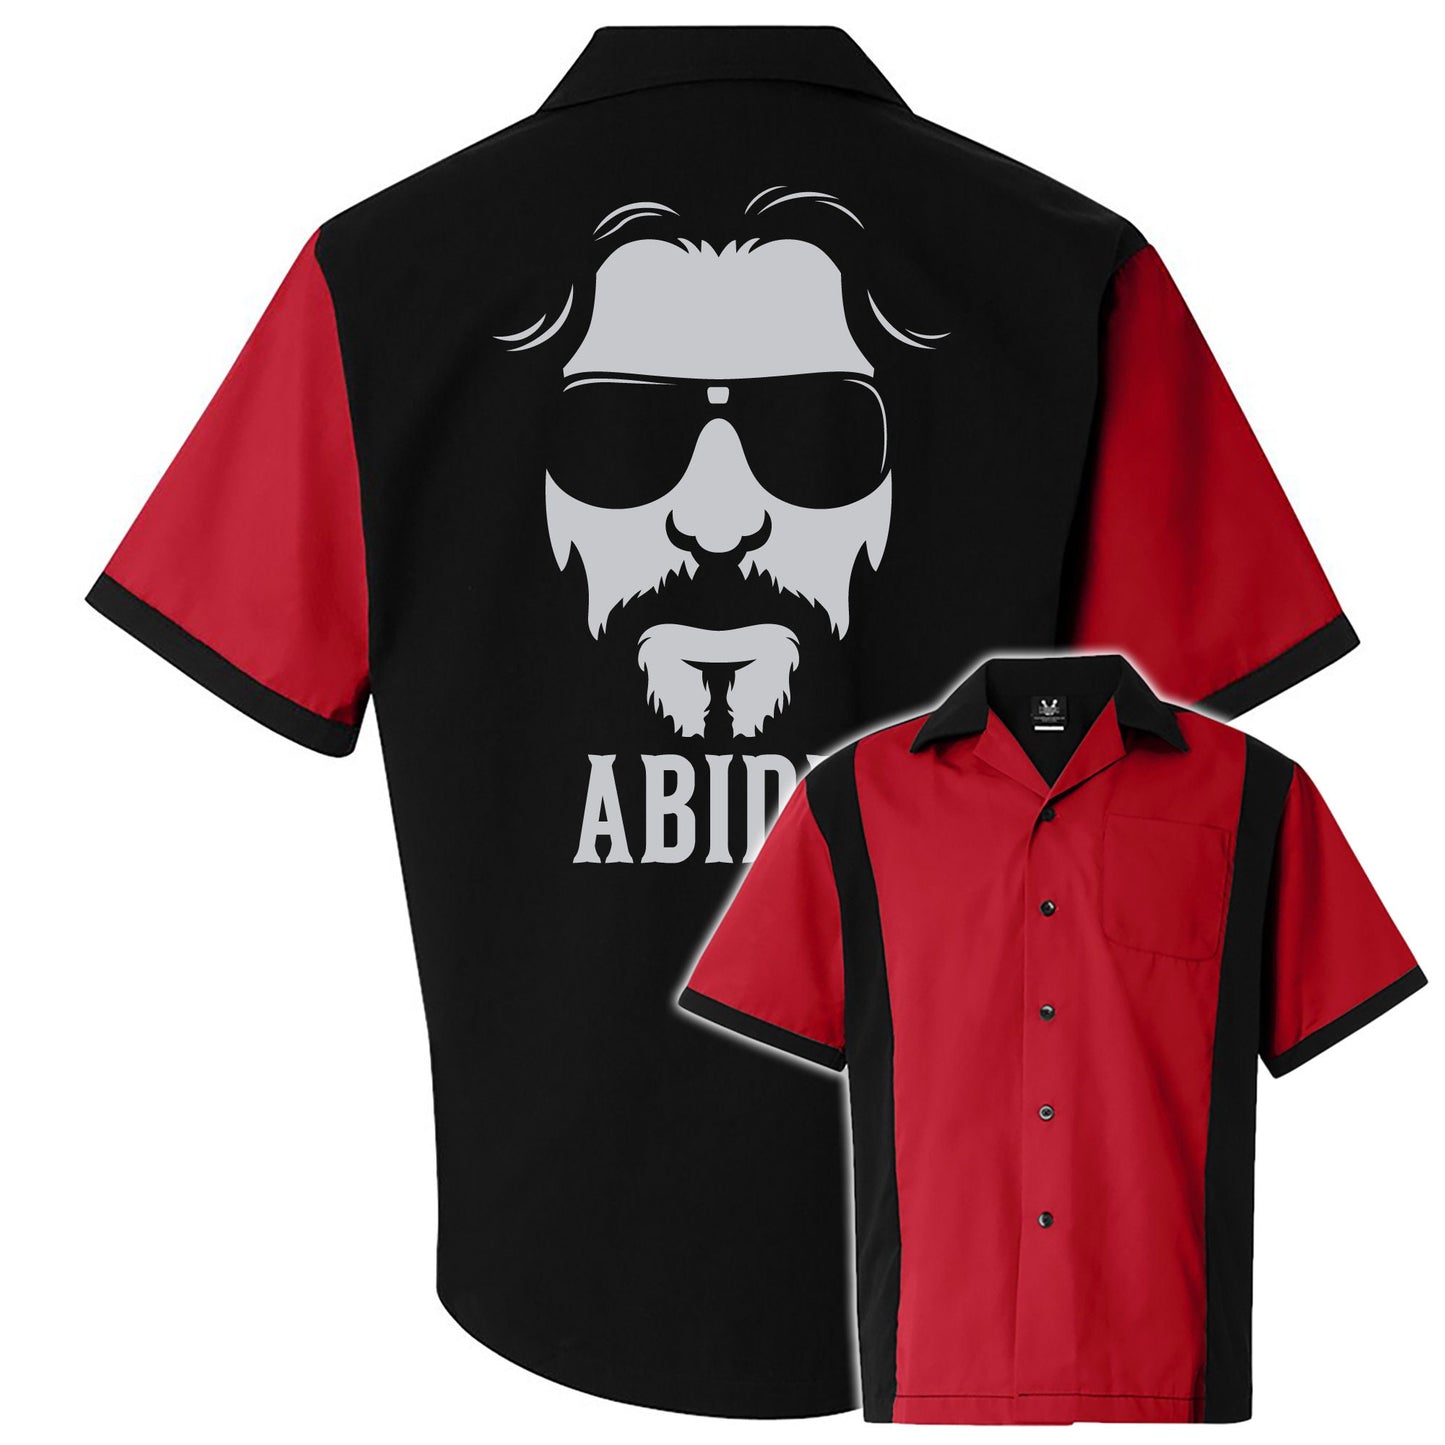 Abide Dude Retro Bowling Shirt - Retro Two - Includes Embroidered Name #130